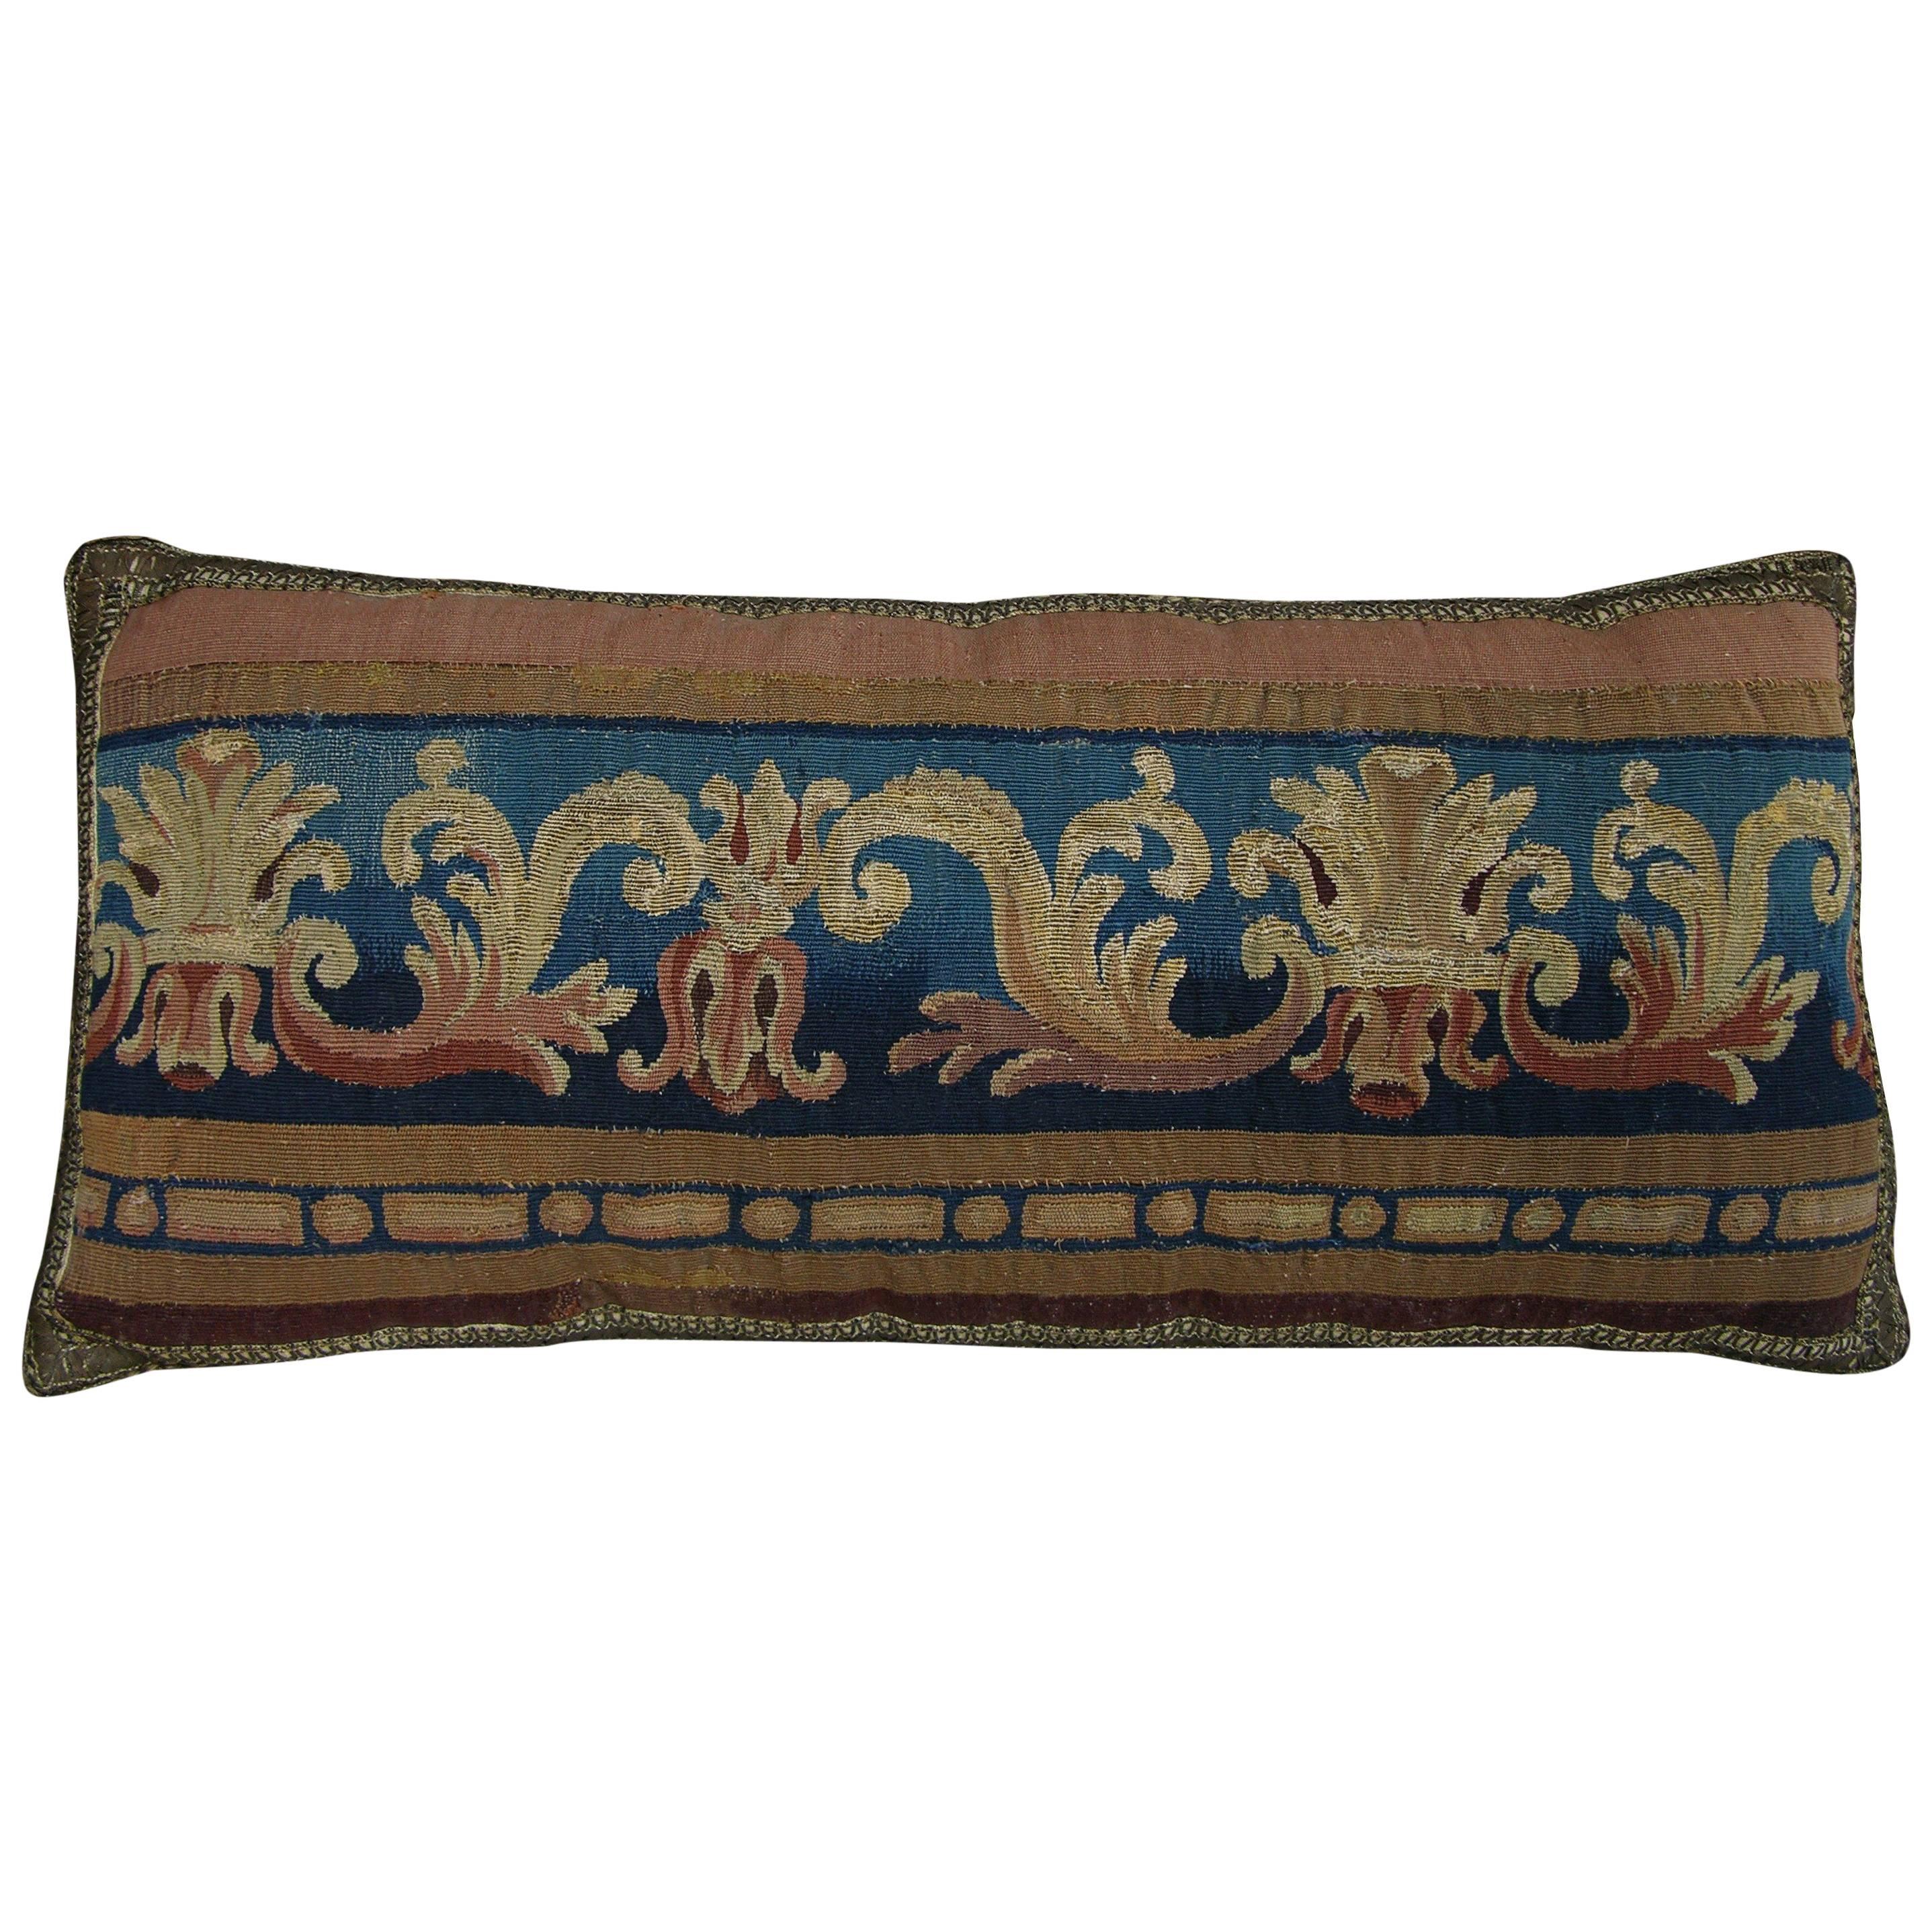 Antique Brussels Tapestry Pillow, circa 16th Century 188p For Sale